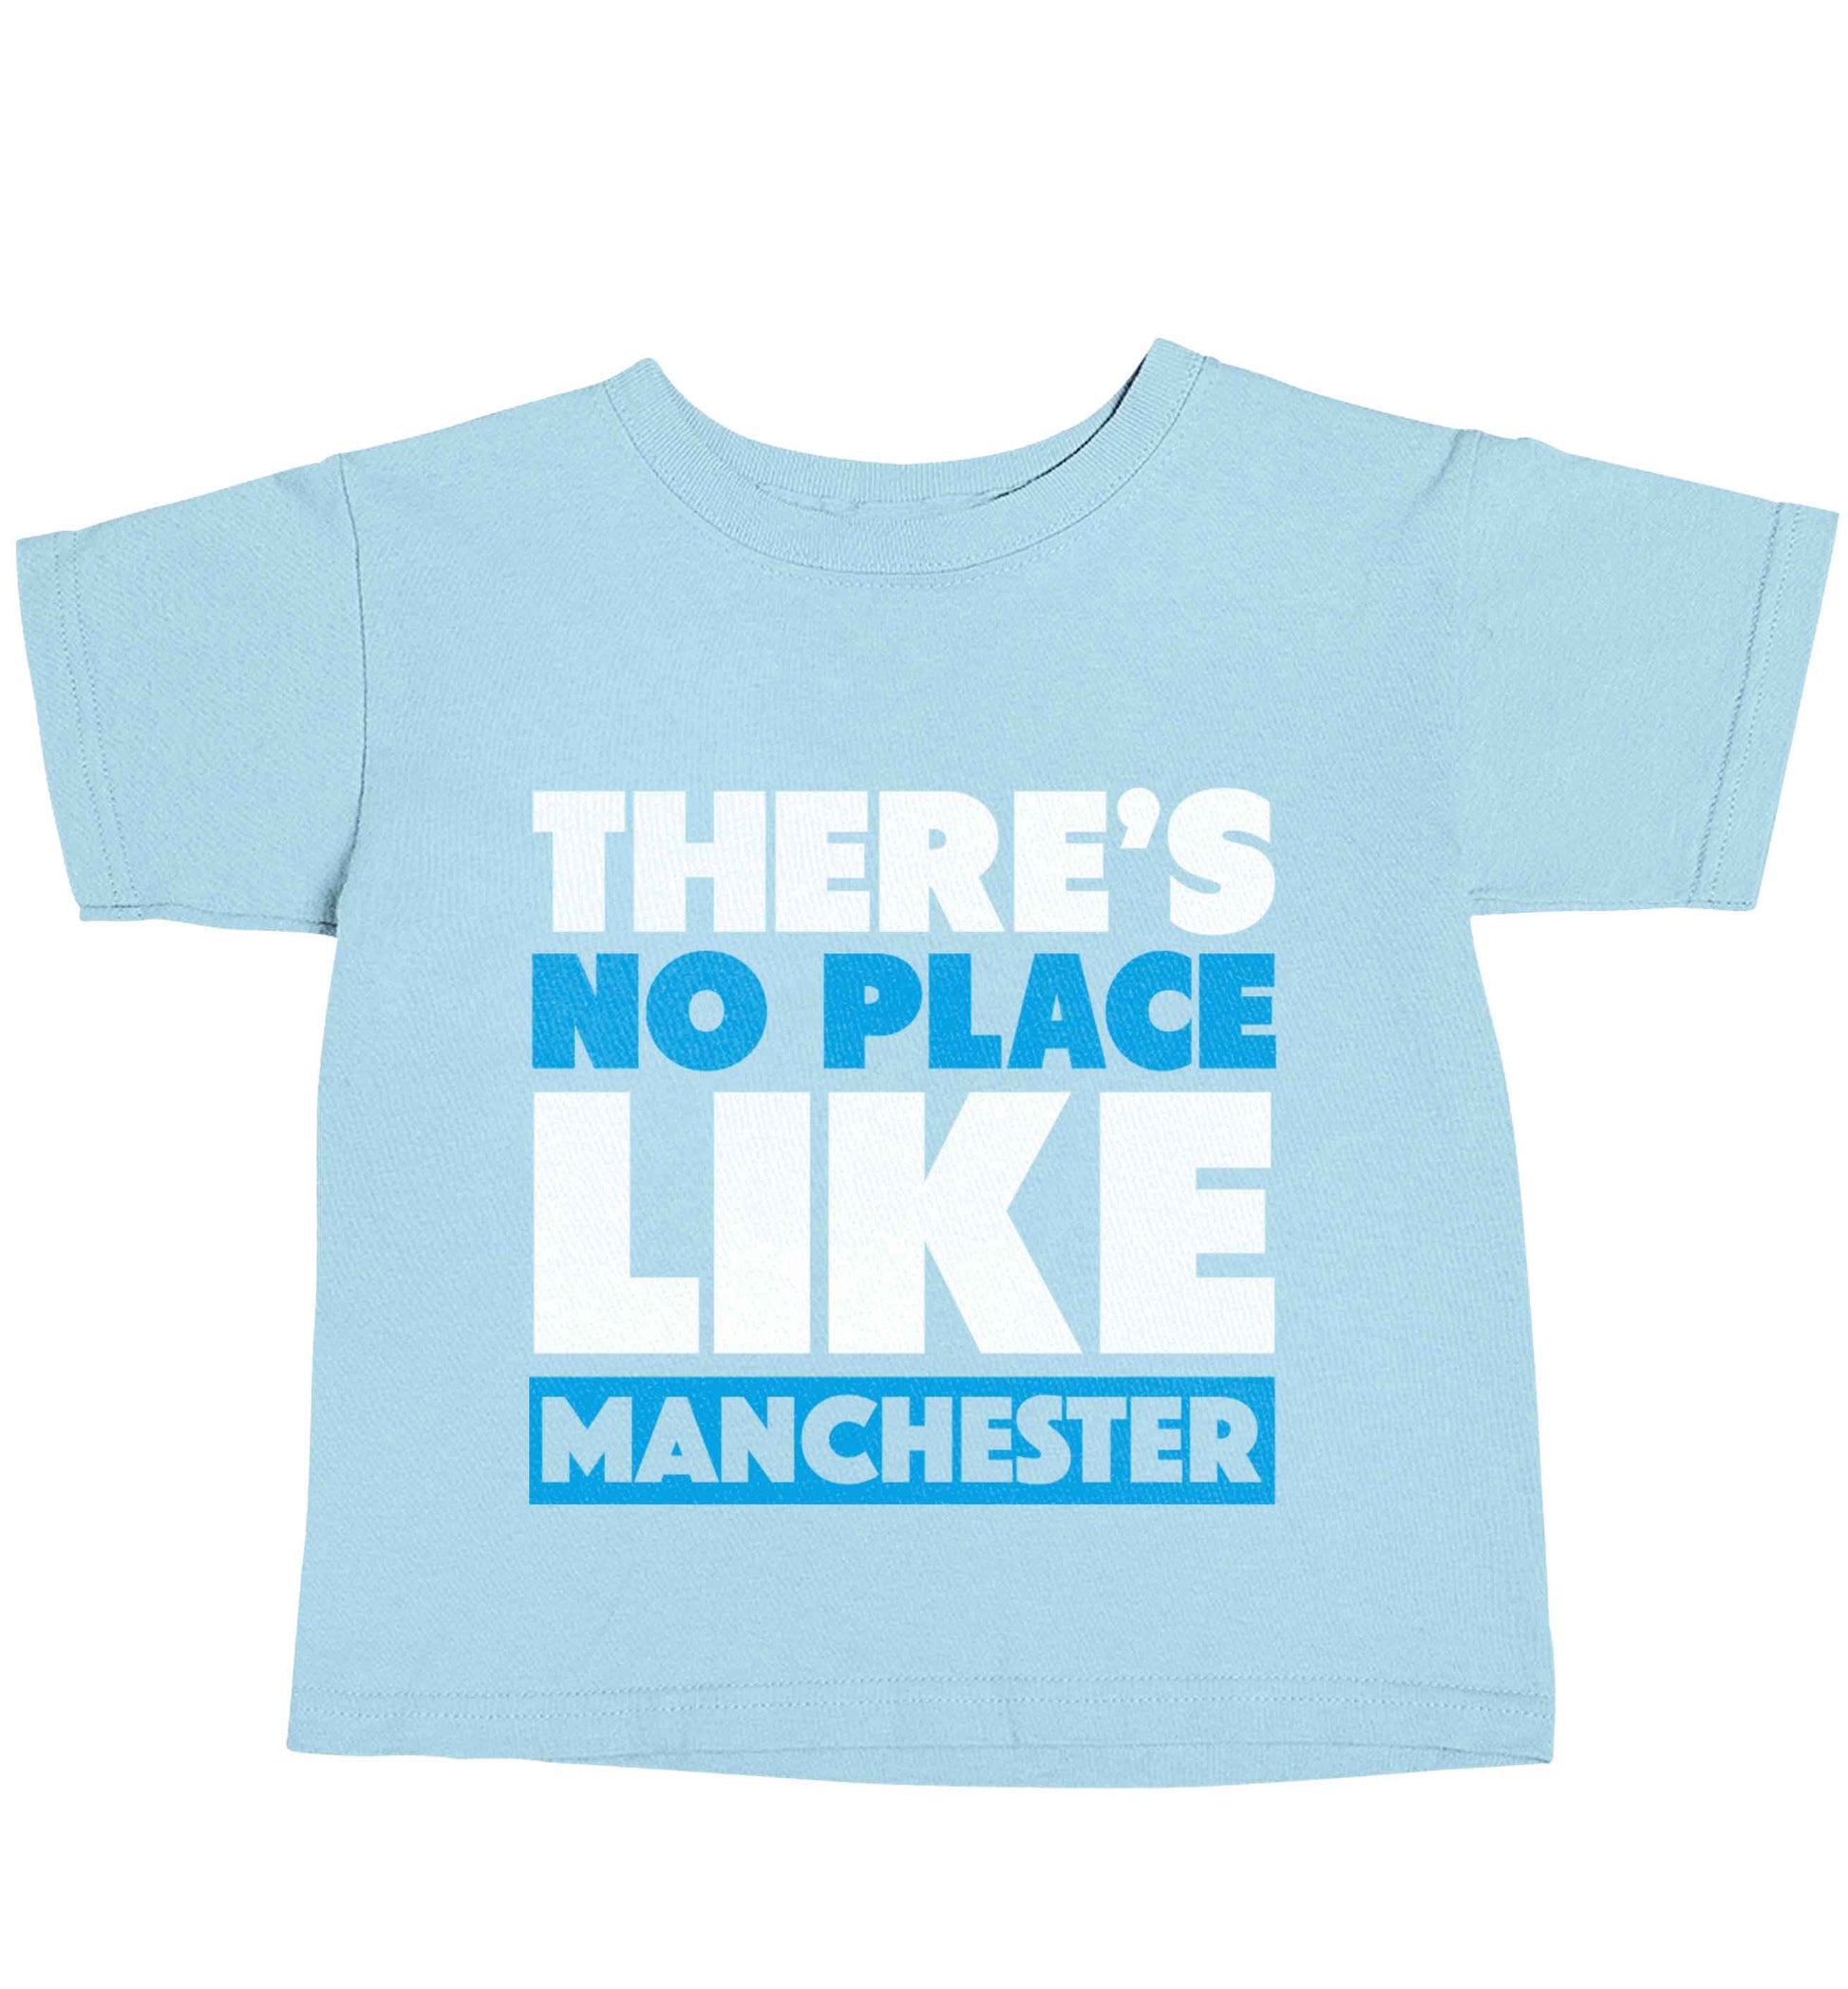 There's no place like Manchester light blue baby toddler Tshirt 2 Years